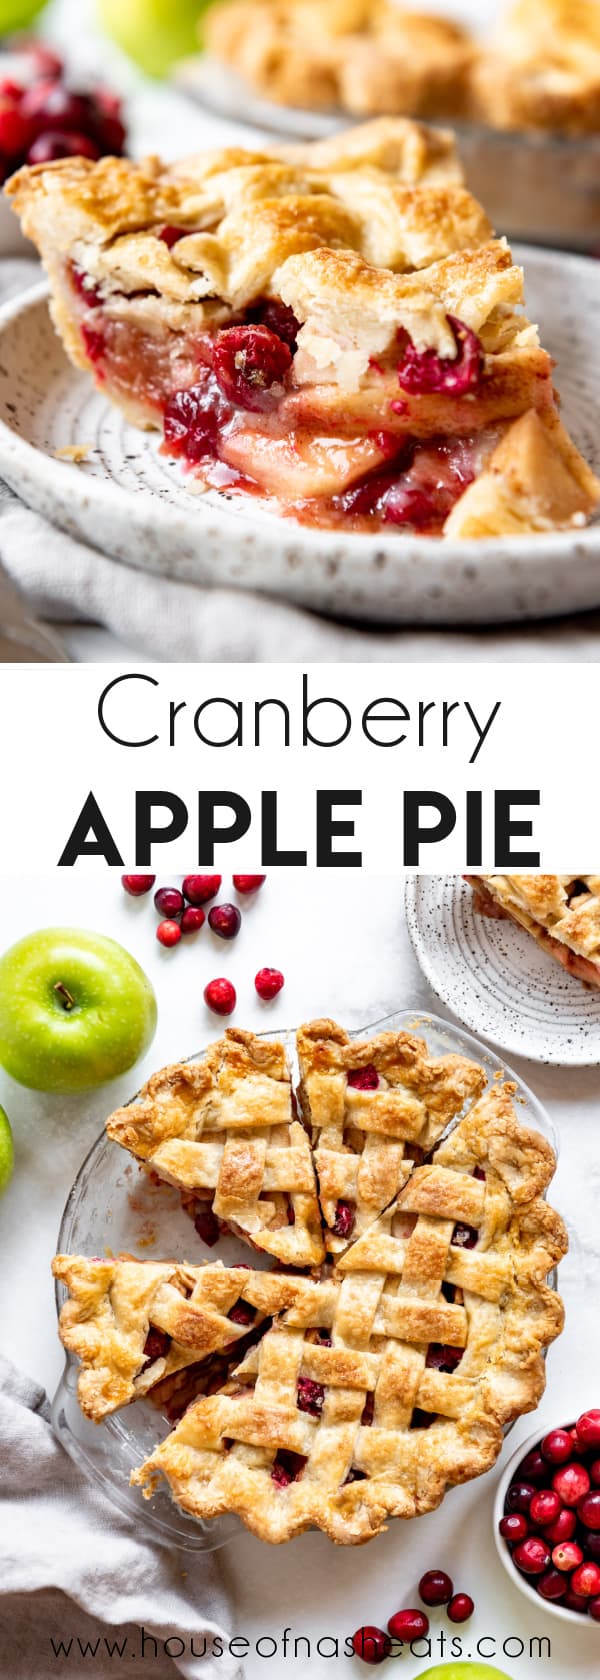 A collage of images of cranberry apple pie with text overlay.